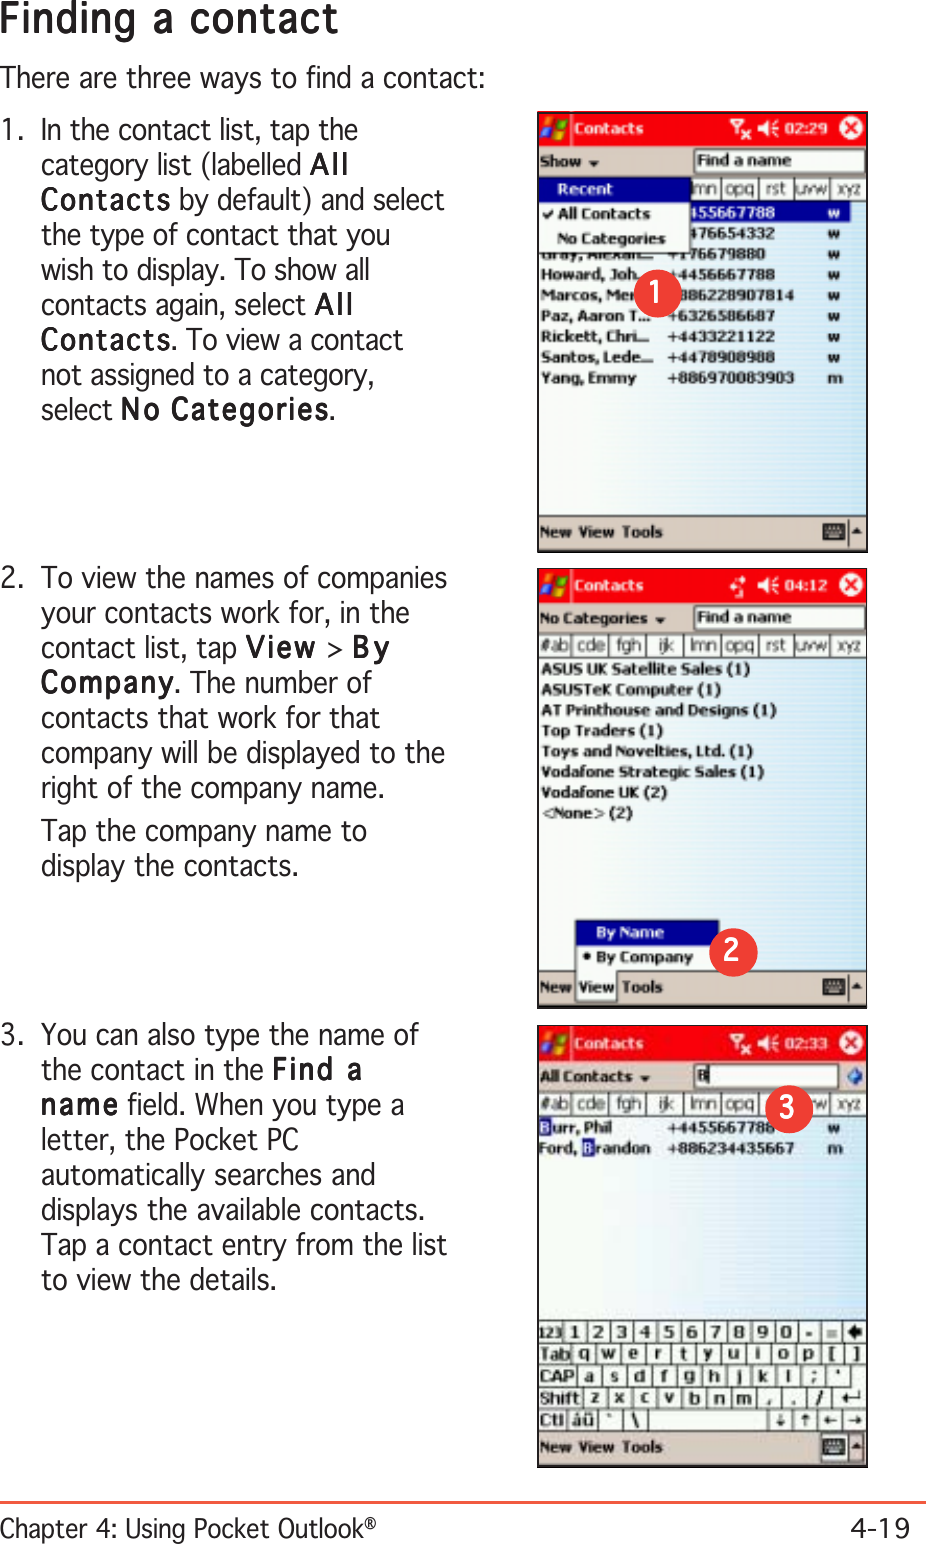 Chapter 4: Using Pocket Outlook®4-19Finding a contactFinding a contactFinding a contactFinding a contactFinding a contactThere are three ways to find a contact:1. In the contact list, tap thecategory list (labelled AllAllAllAllAllContactsContactsContactsContactsContacts by default) and selectthe type of contact that youwish to display. To show allcontacts again, select AllAllAllAllAllContactsContactsContactsContactsContacts. To view a contactnot assigned to a category,select NoNoNoNoNo Categories Categories Categories Categories Categories.11111222222. To view the names of companiesyour contacts work for, in thecontact list, tap ViewViewViewViewView &gt; ByByByByByCompanyCompanyCompanyCompanyCompany. The number ofcontacts that work for thatcompany will be displayed to theright of the company name.Tap the company name todisplay the contacts.3. You can also type the name ofthe contact in the Find aFind aFind aFind aFind anamenamenamenamena me field. When you type aletter, the Pocket PCautomatically searches anddisplays the available contacts.Tap a contact entry from the listto view the details.33333